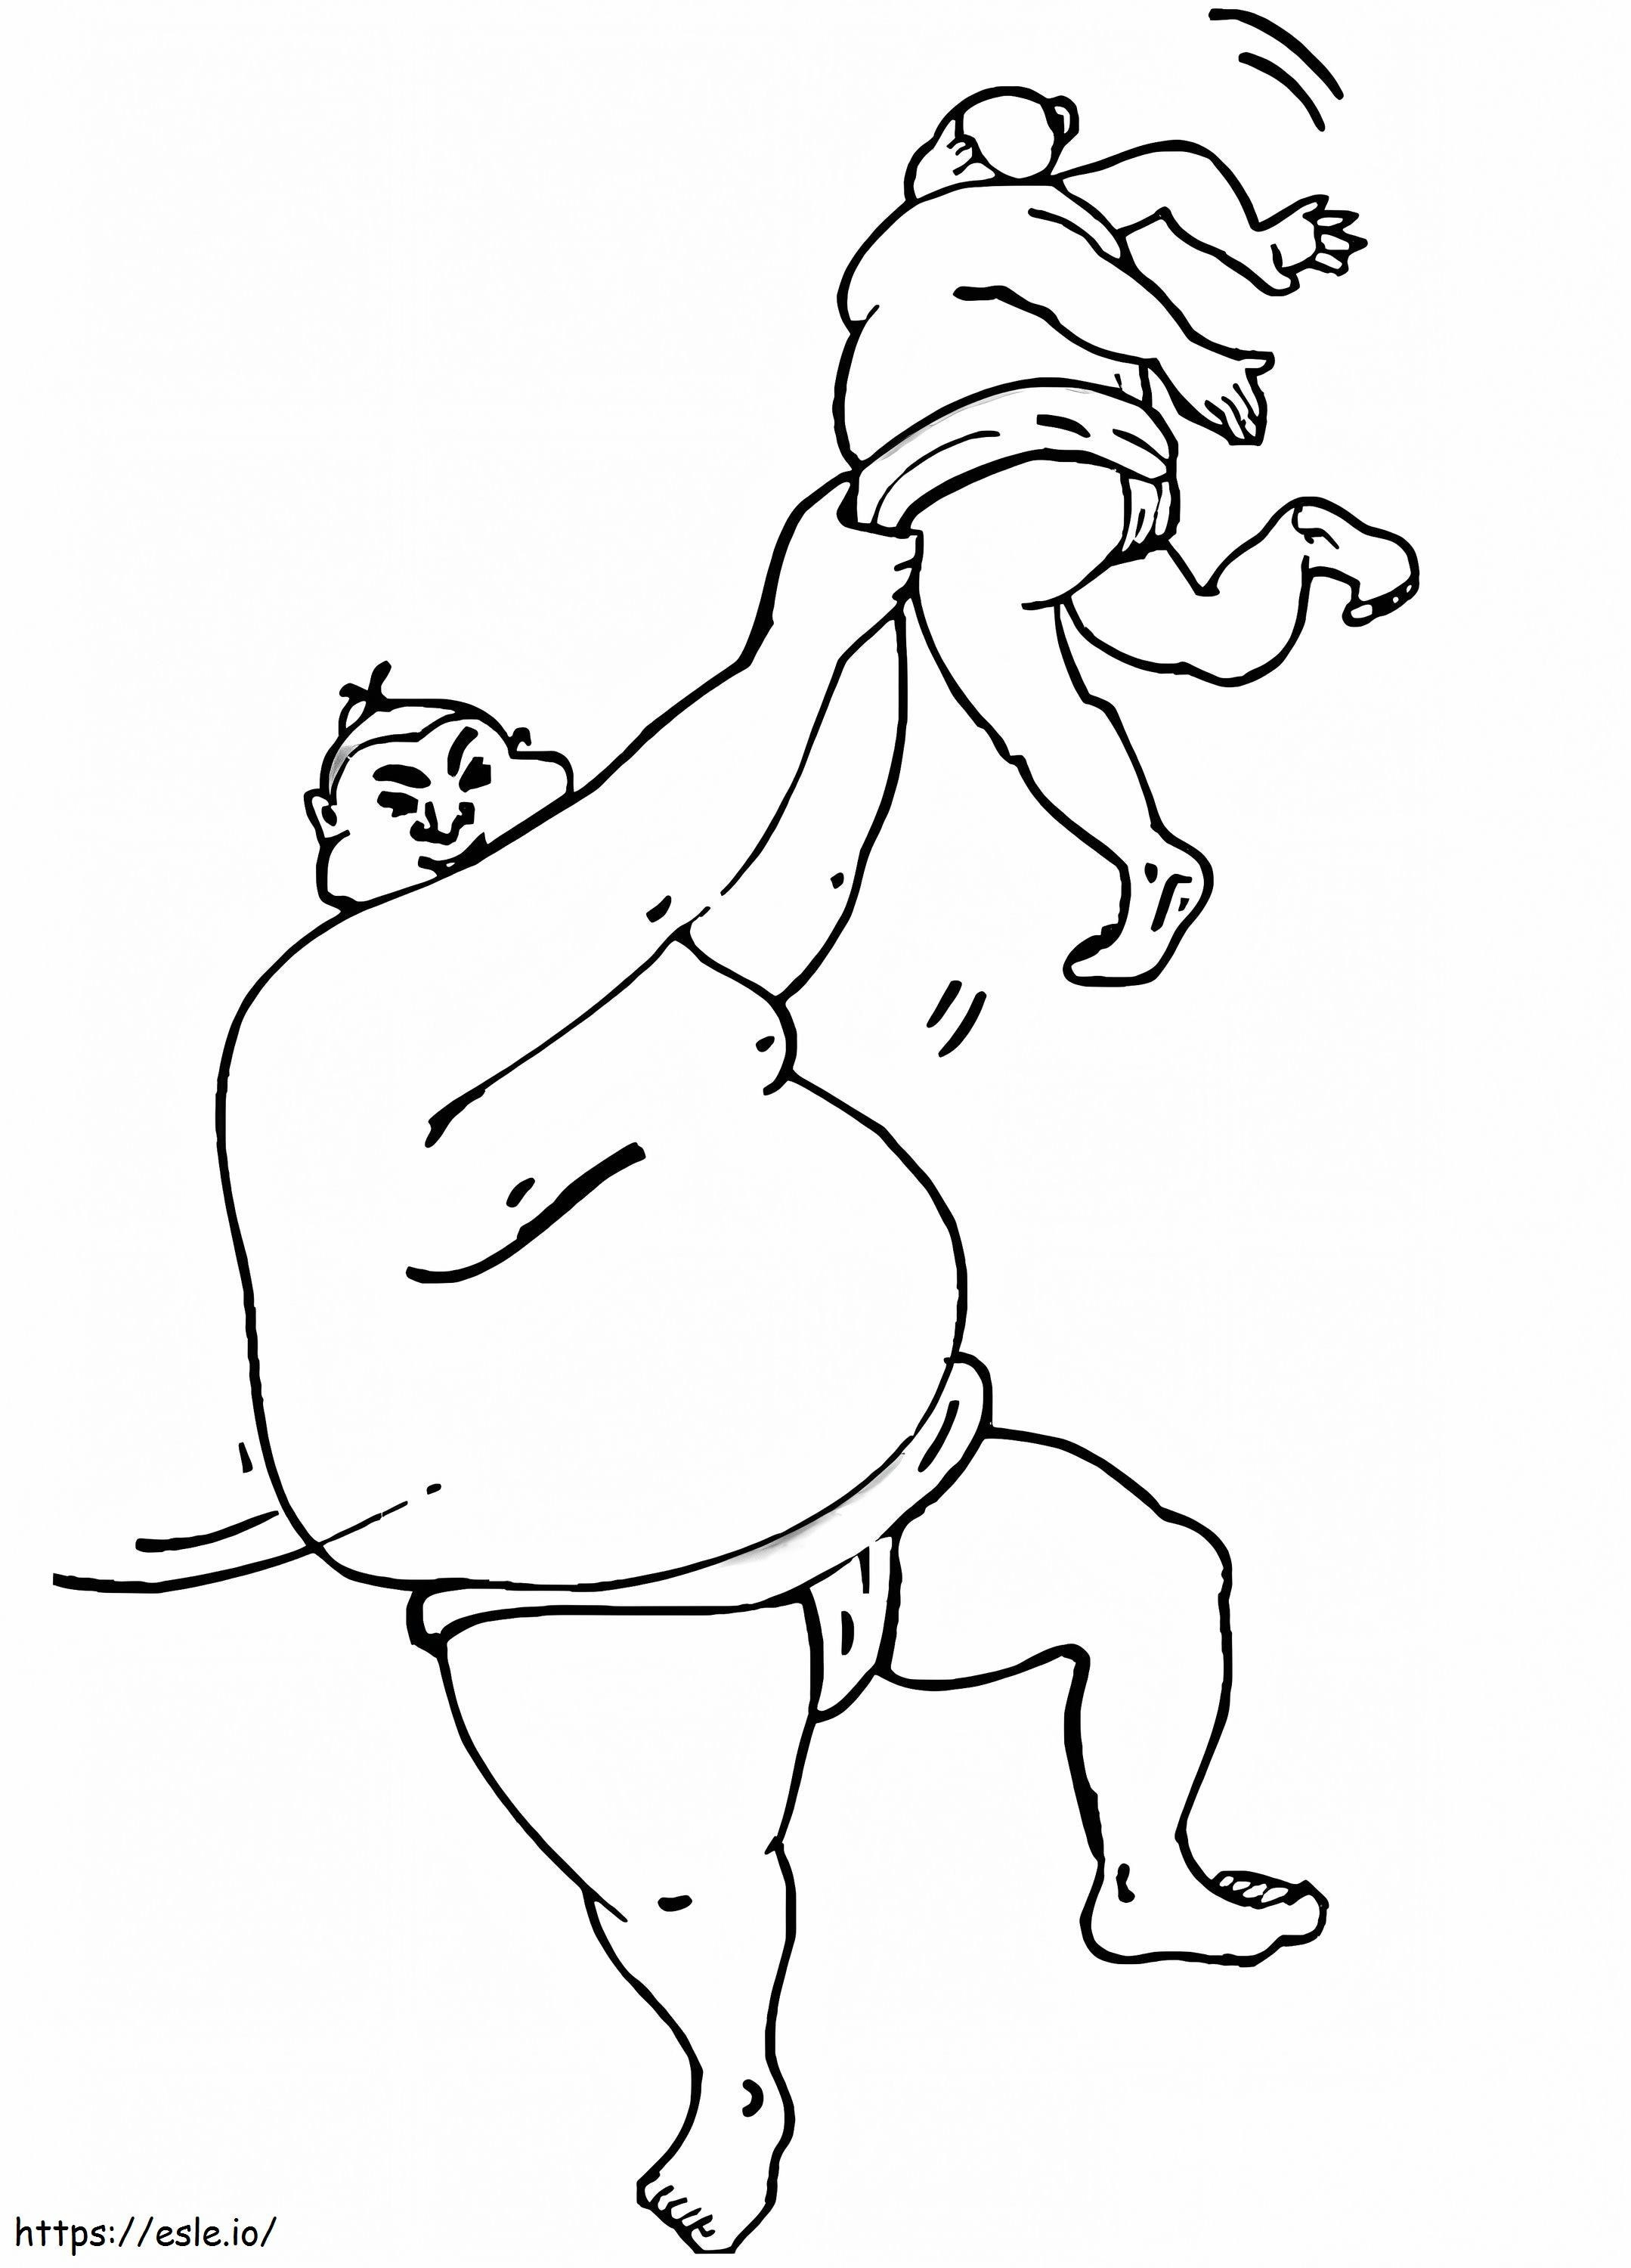 Wrestlers Sumo coloring page